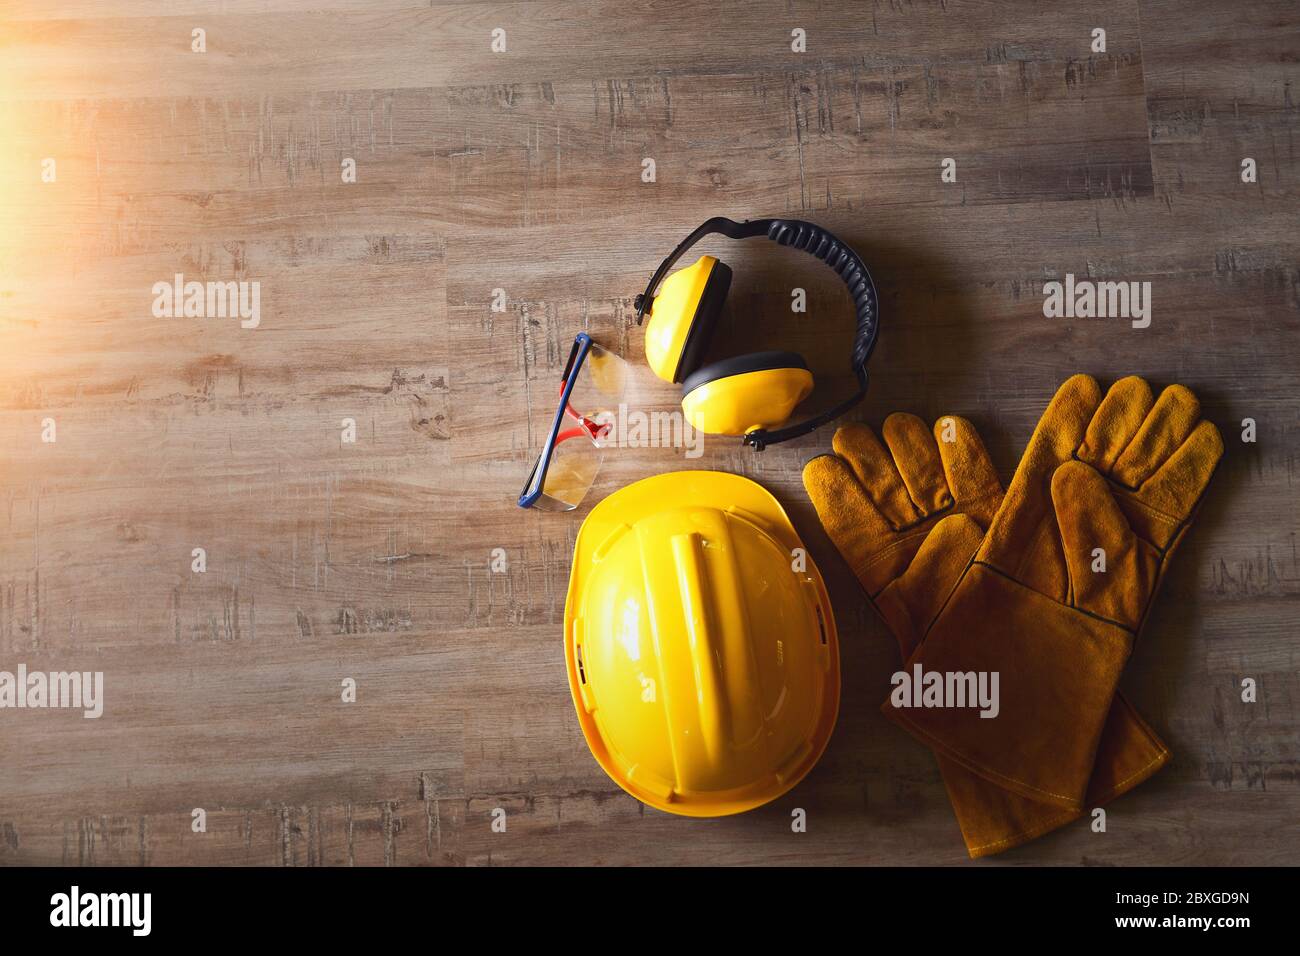 Safety helmet, goggles, gloves and ear defenders on a wooden table Stock Photo